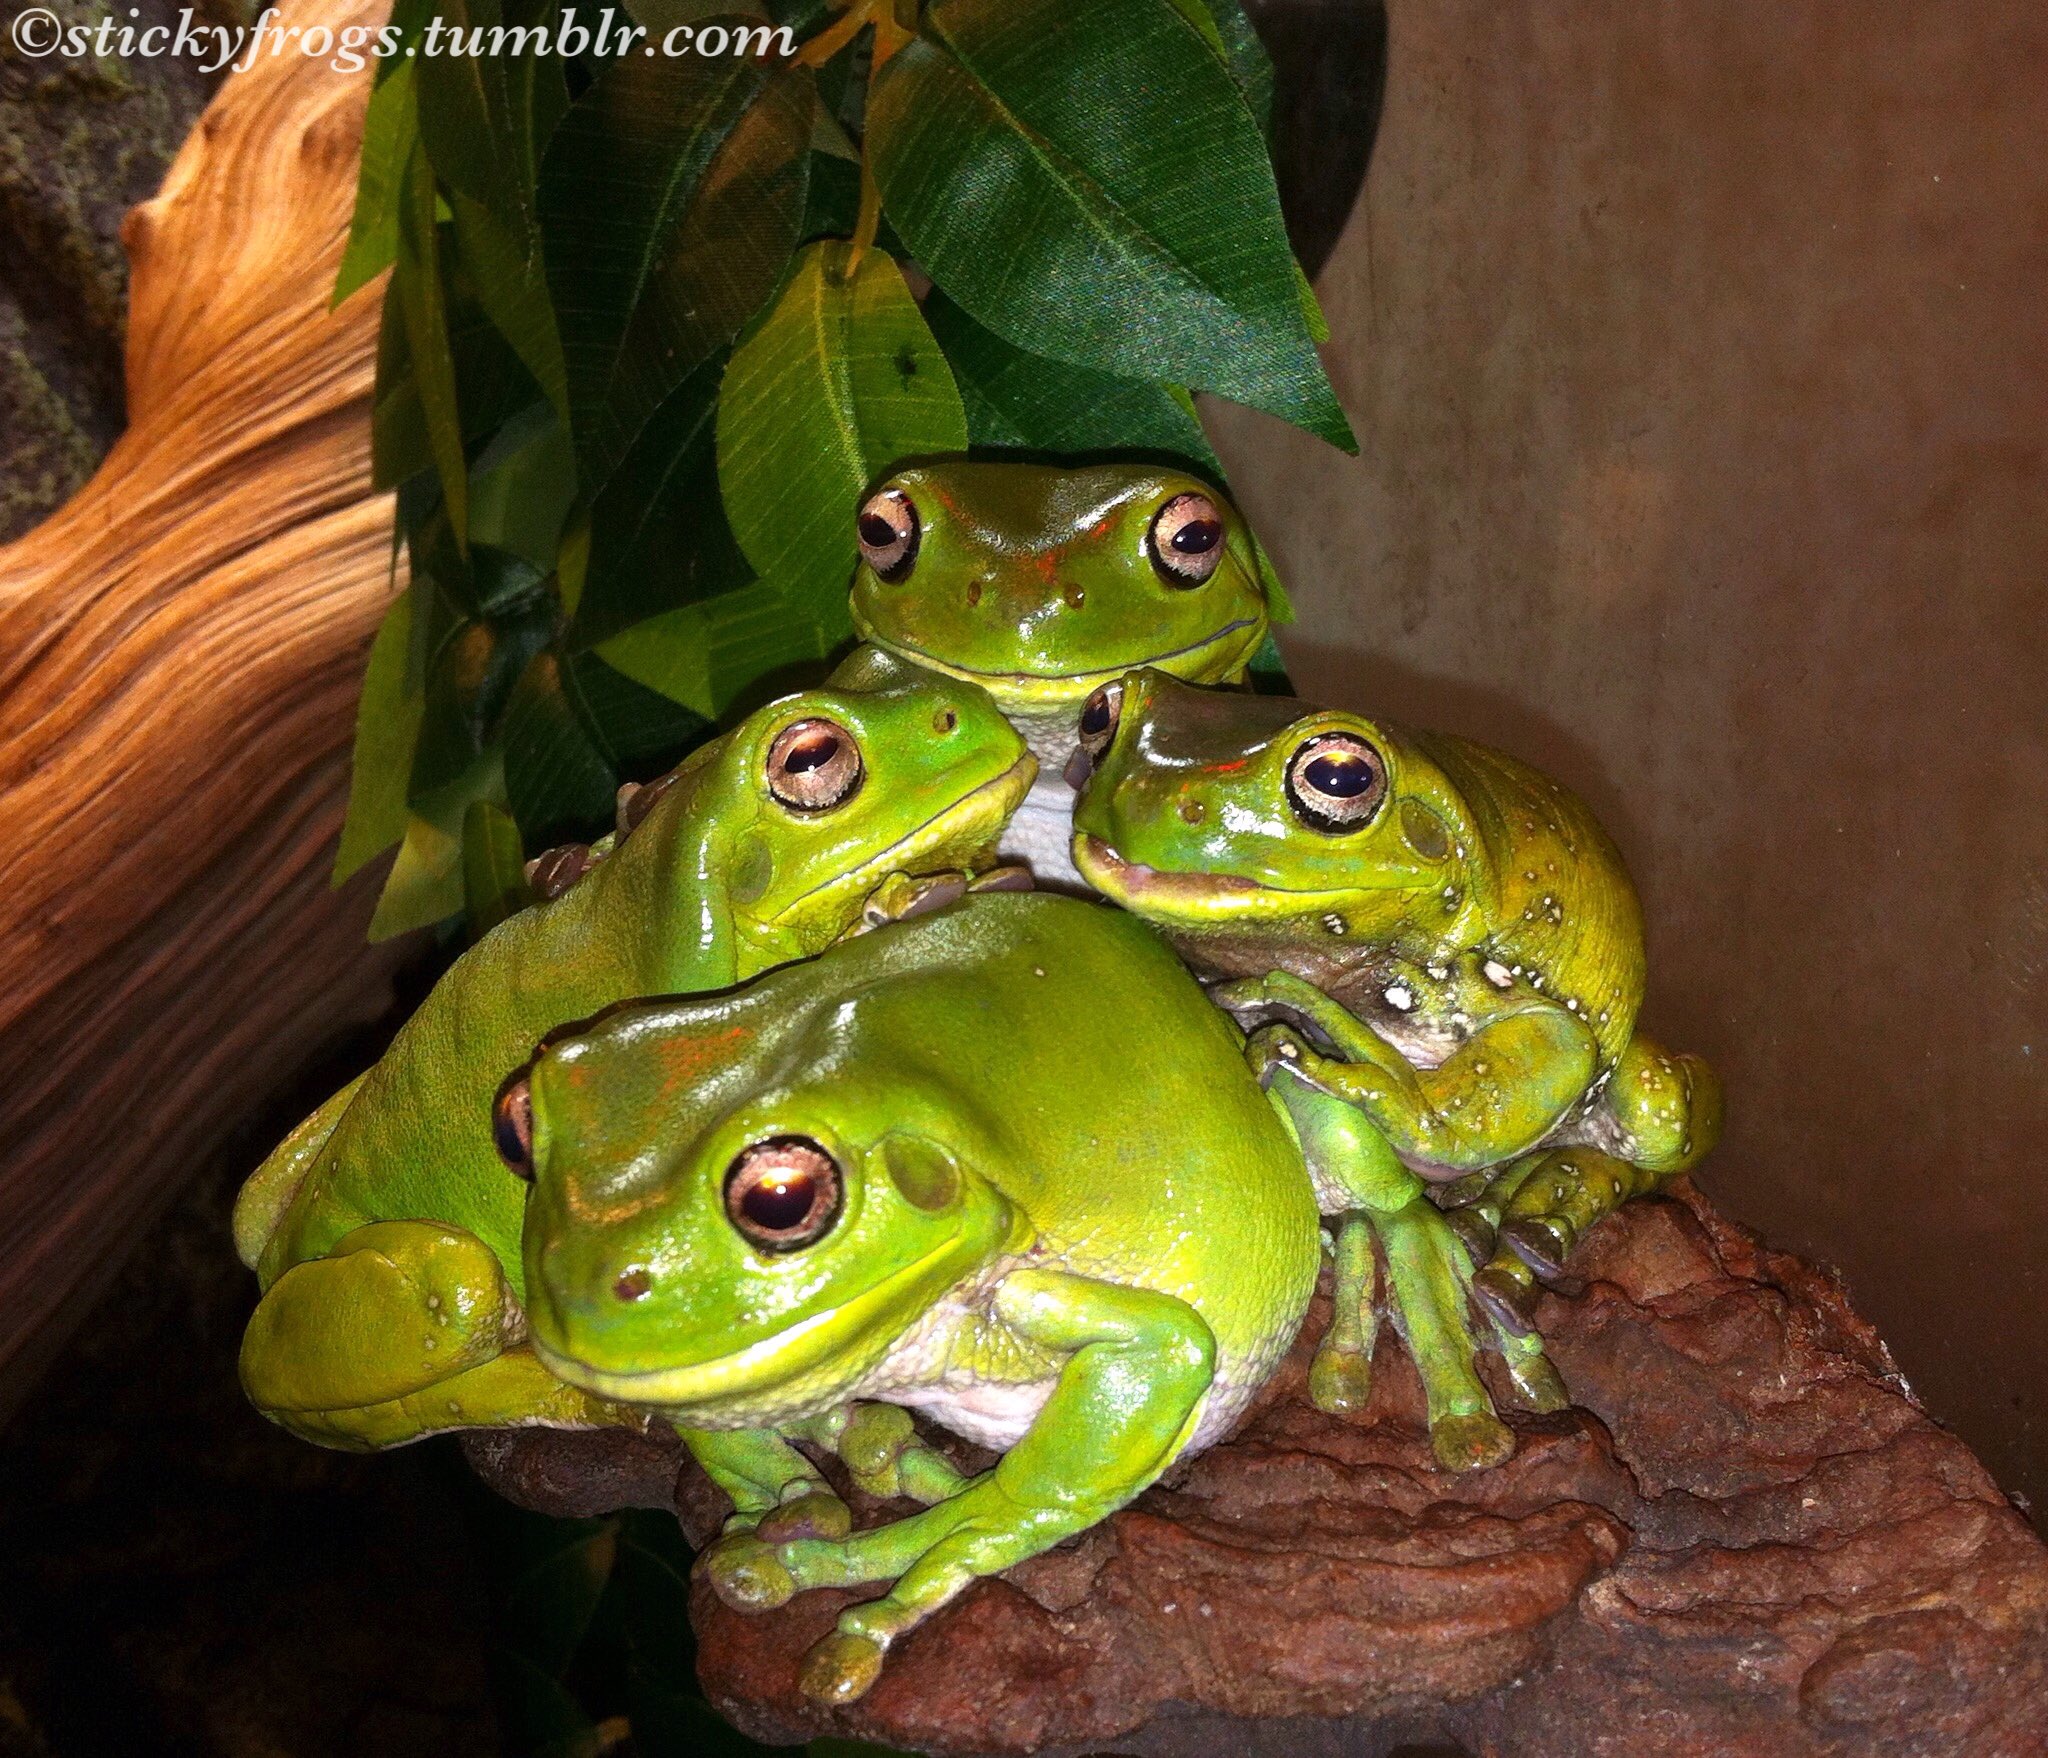 Sticky Frogs on X: Today's Important Frog Meeting was Very Secret! Gumby  was on lookout while everyone else talked about Secret Frog Things!   / X